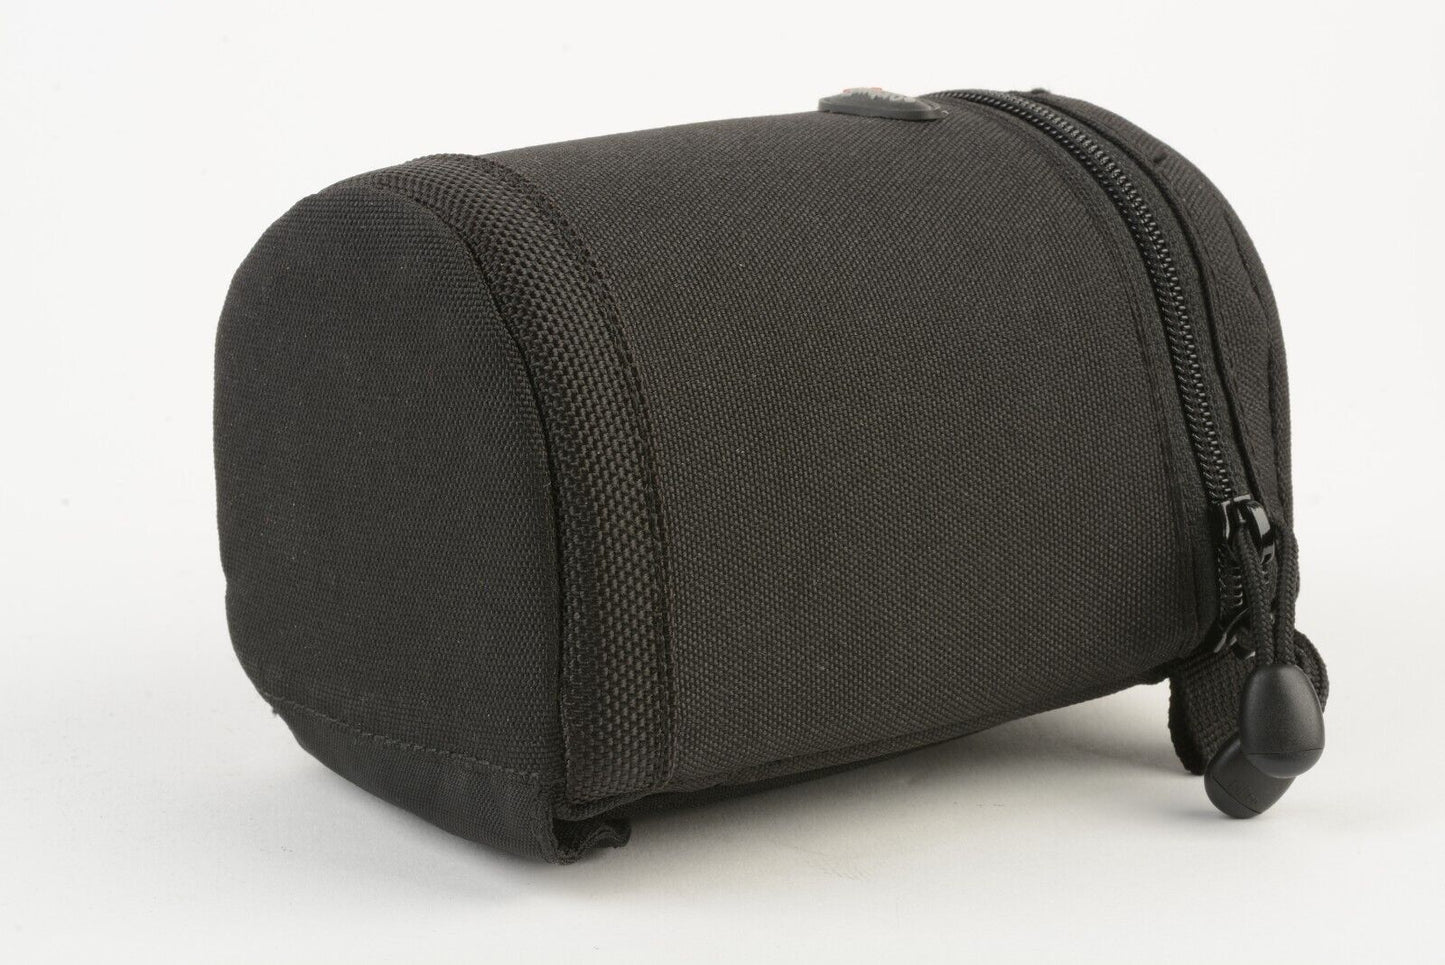 EXC++ LOWEPRO LENS CASE #1 BLACK PADDED LENS CASE 6" TALL x 3" WIDE